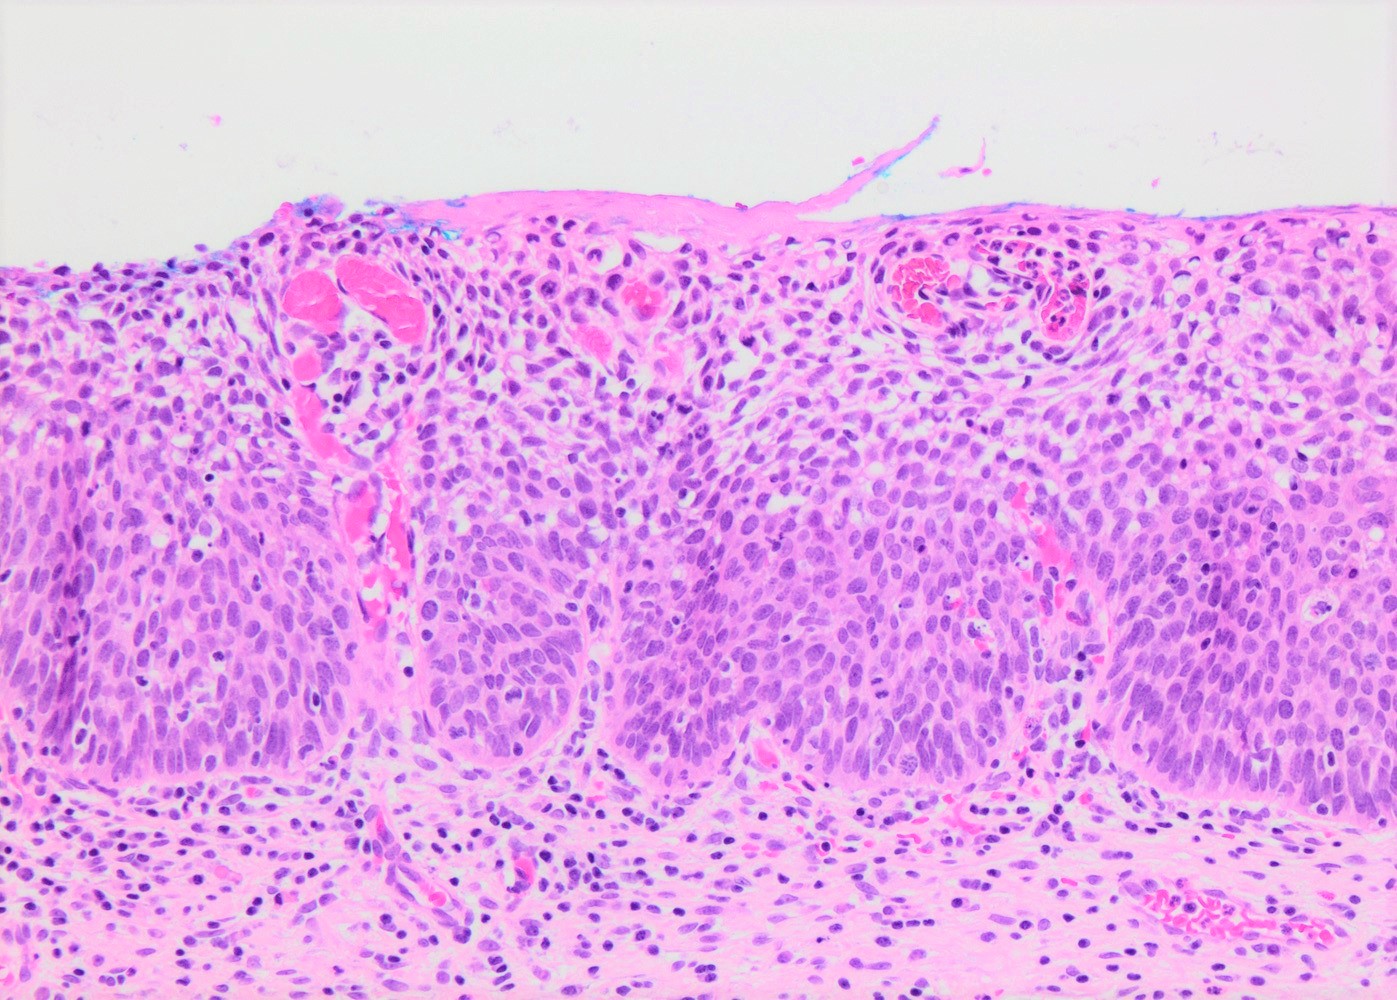 HSIL with superficial keratinization